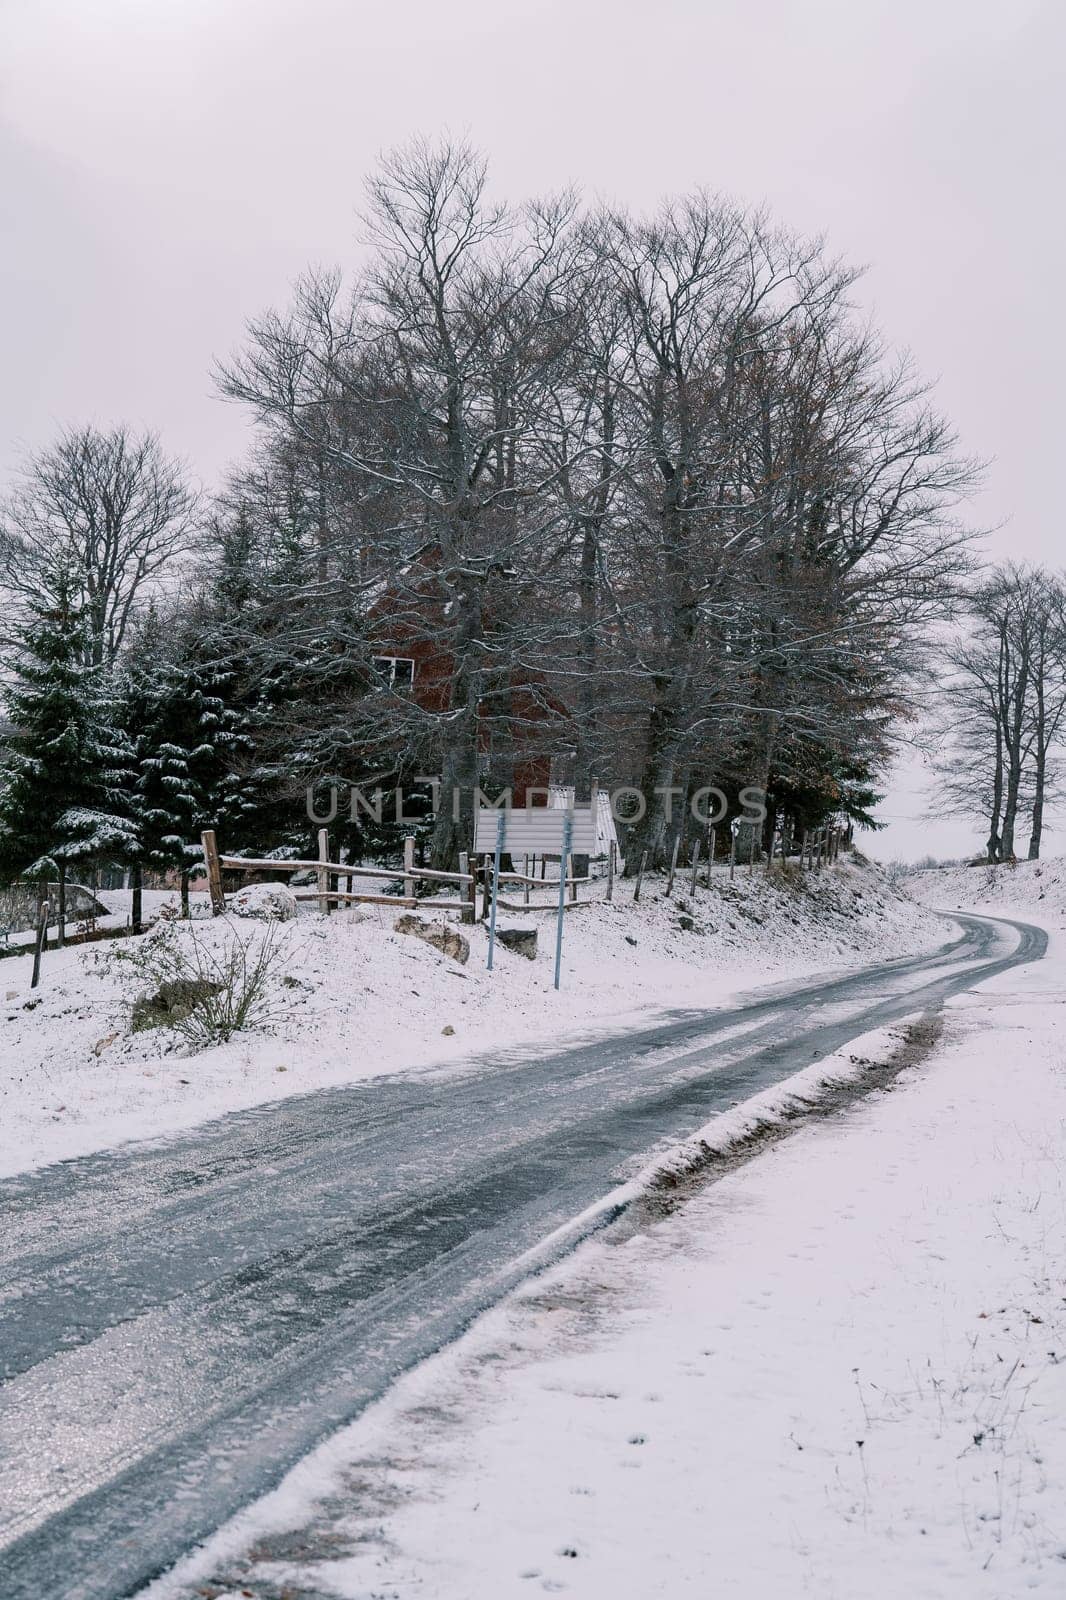 Icy road in a snowy village in the forest. High quality photo